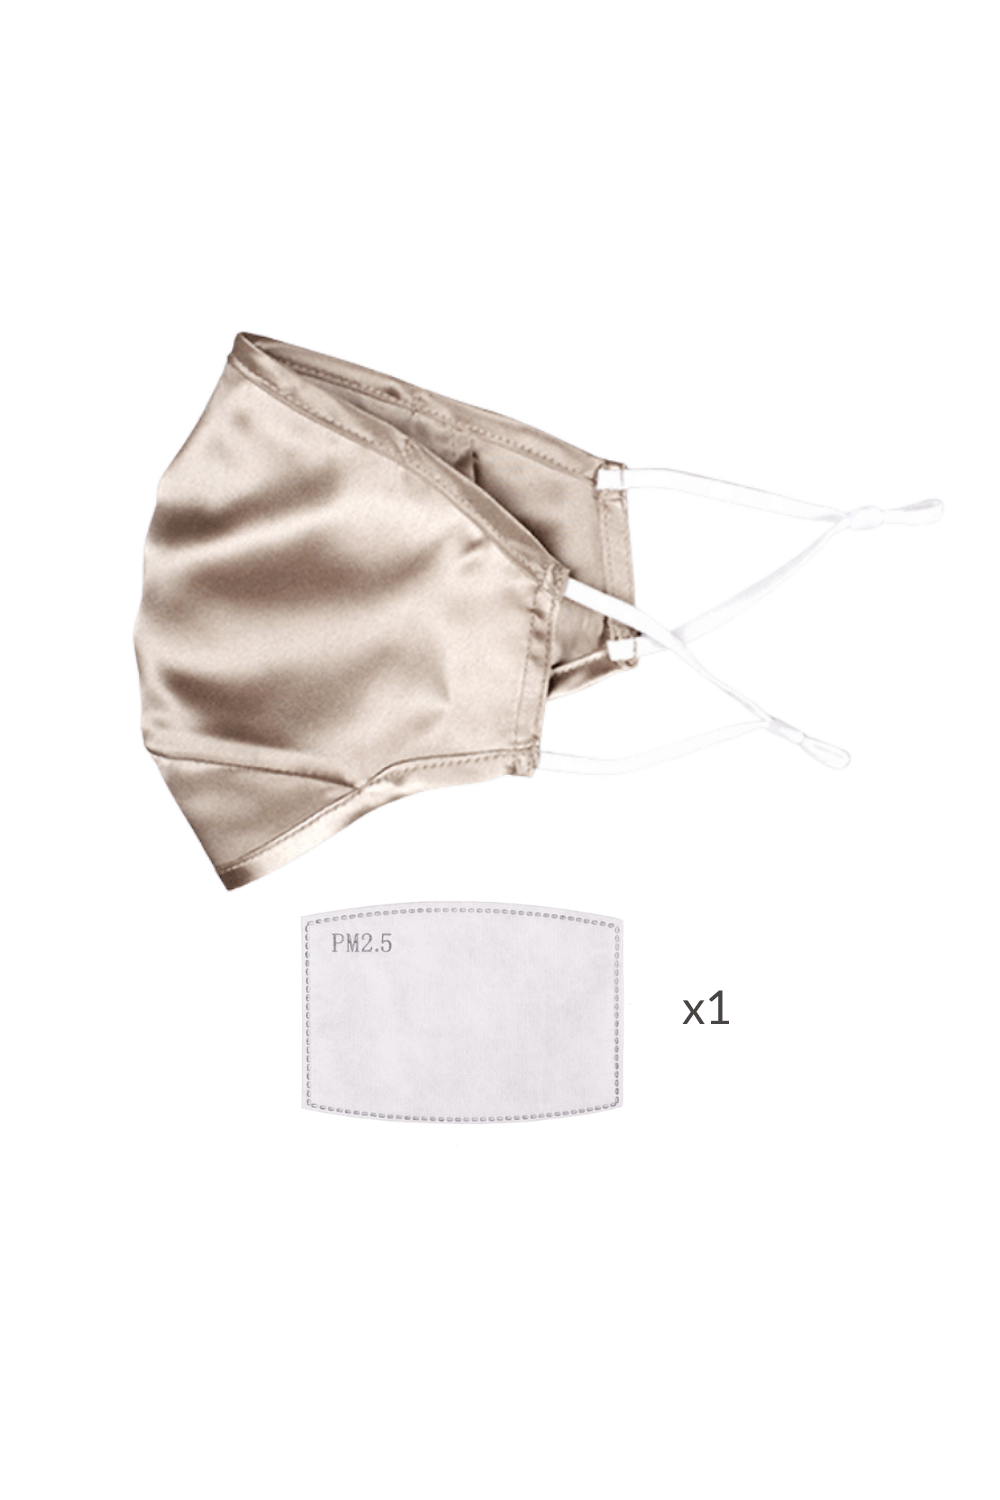 ULTRA Silk Face Mask - Champagne Gold (with Filter Pocket and Nose Wire) - BASK ™